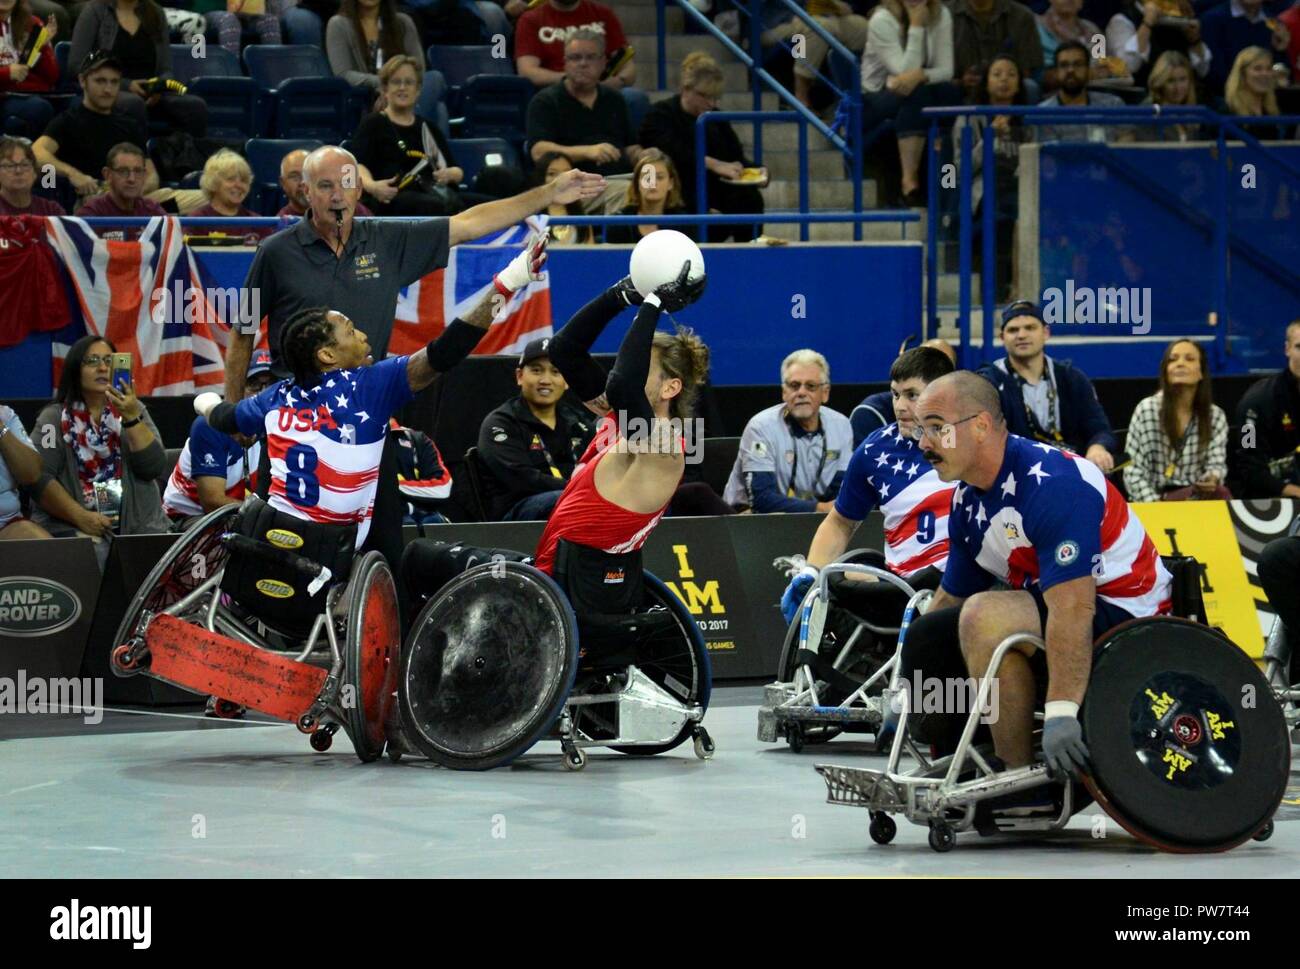 U.S. Marine Corps veteran Anthony McDaniel, a former sergeant and member of Team U.S., tries to block an opposing pass during wheelchair rugby finals at the 2017 Invictus Games in the Mattamy Athletic Centre in Toronto, Canada, Sept. 28, 2017. The Invictus Games were established by Prince Harry of Wales in 2014, and have brought together more than 550 wounded and injured veterans to take part in 12 adaptive sporting events. Stock Photo